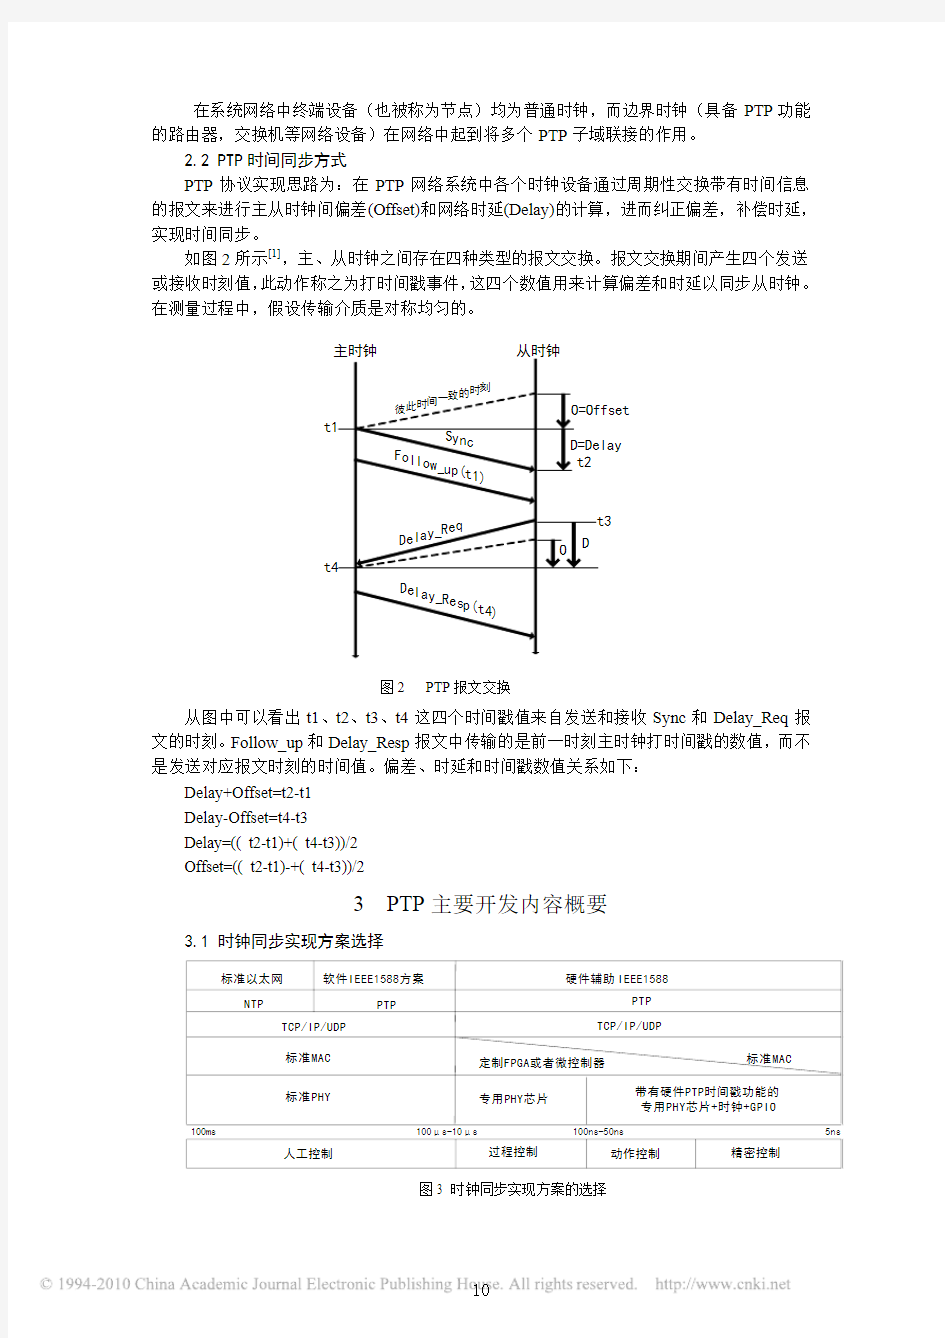 IEEE1588时钟同步实现方式研究